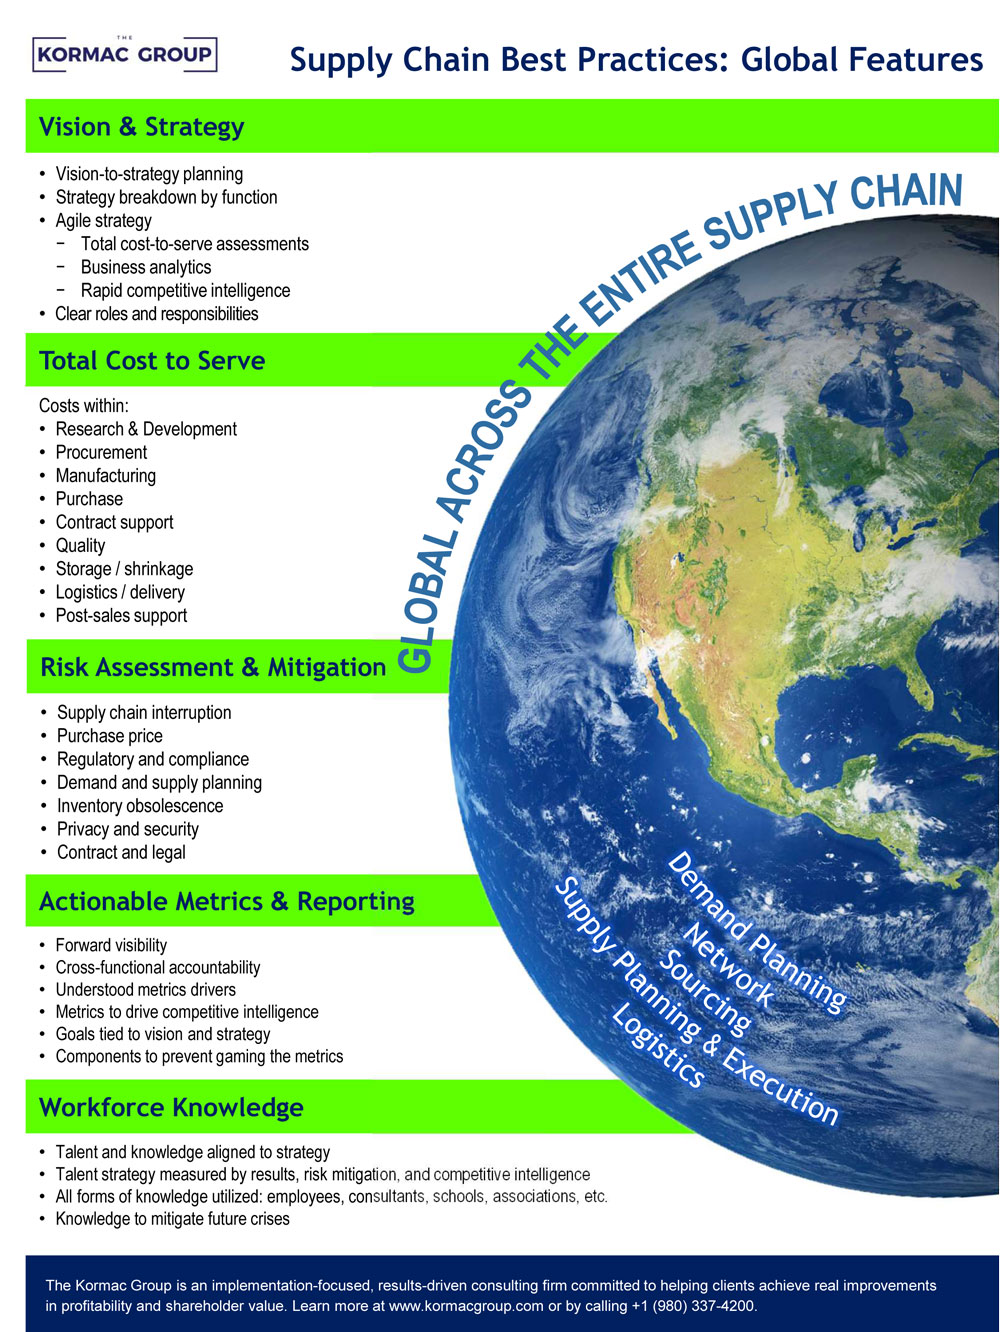 Large table containing Supply Chain Best Practices: Global Features. To view contents, download the PDF (https://kormacgroup.com/wp-content/uploads/2021/07/supply-chain-best-practices-global-features.pdf)